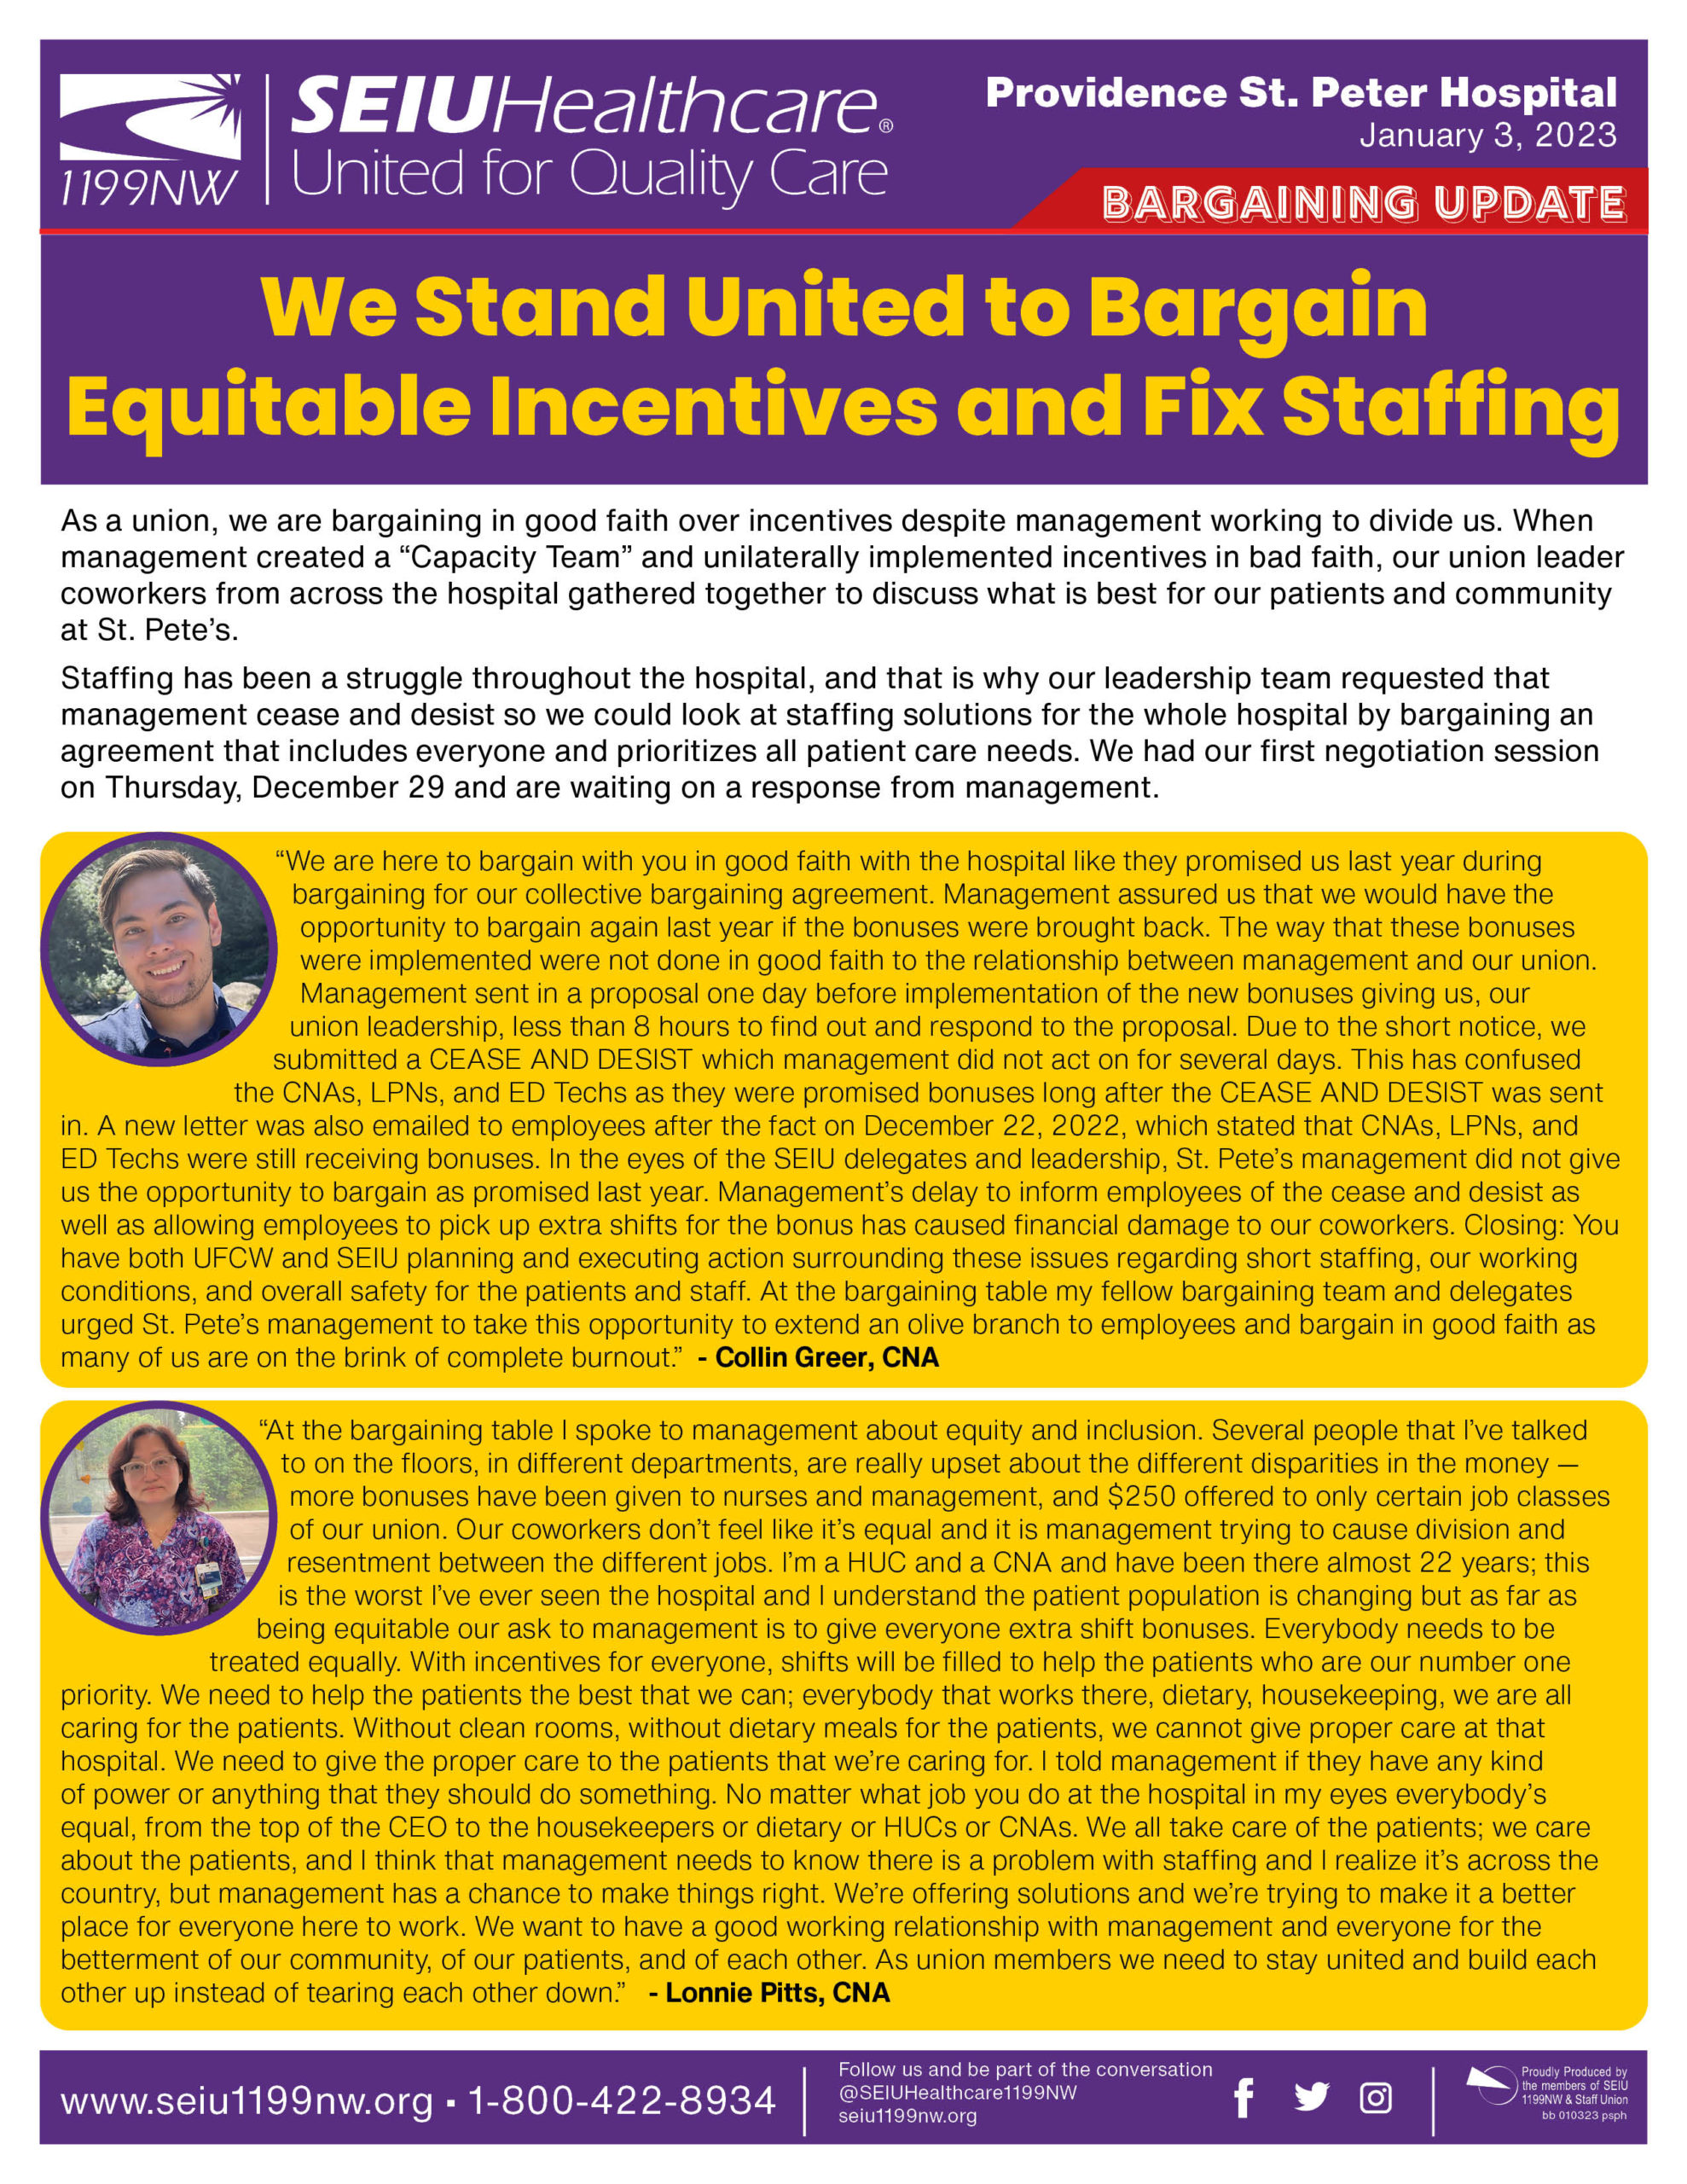 We Stand United to Bargain Equitable Incentives and Fix Staffing